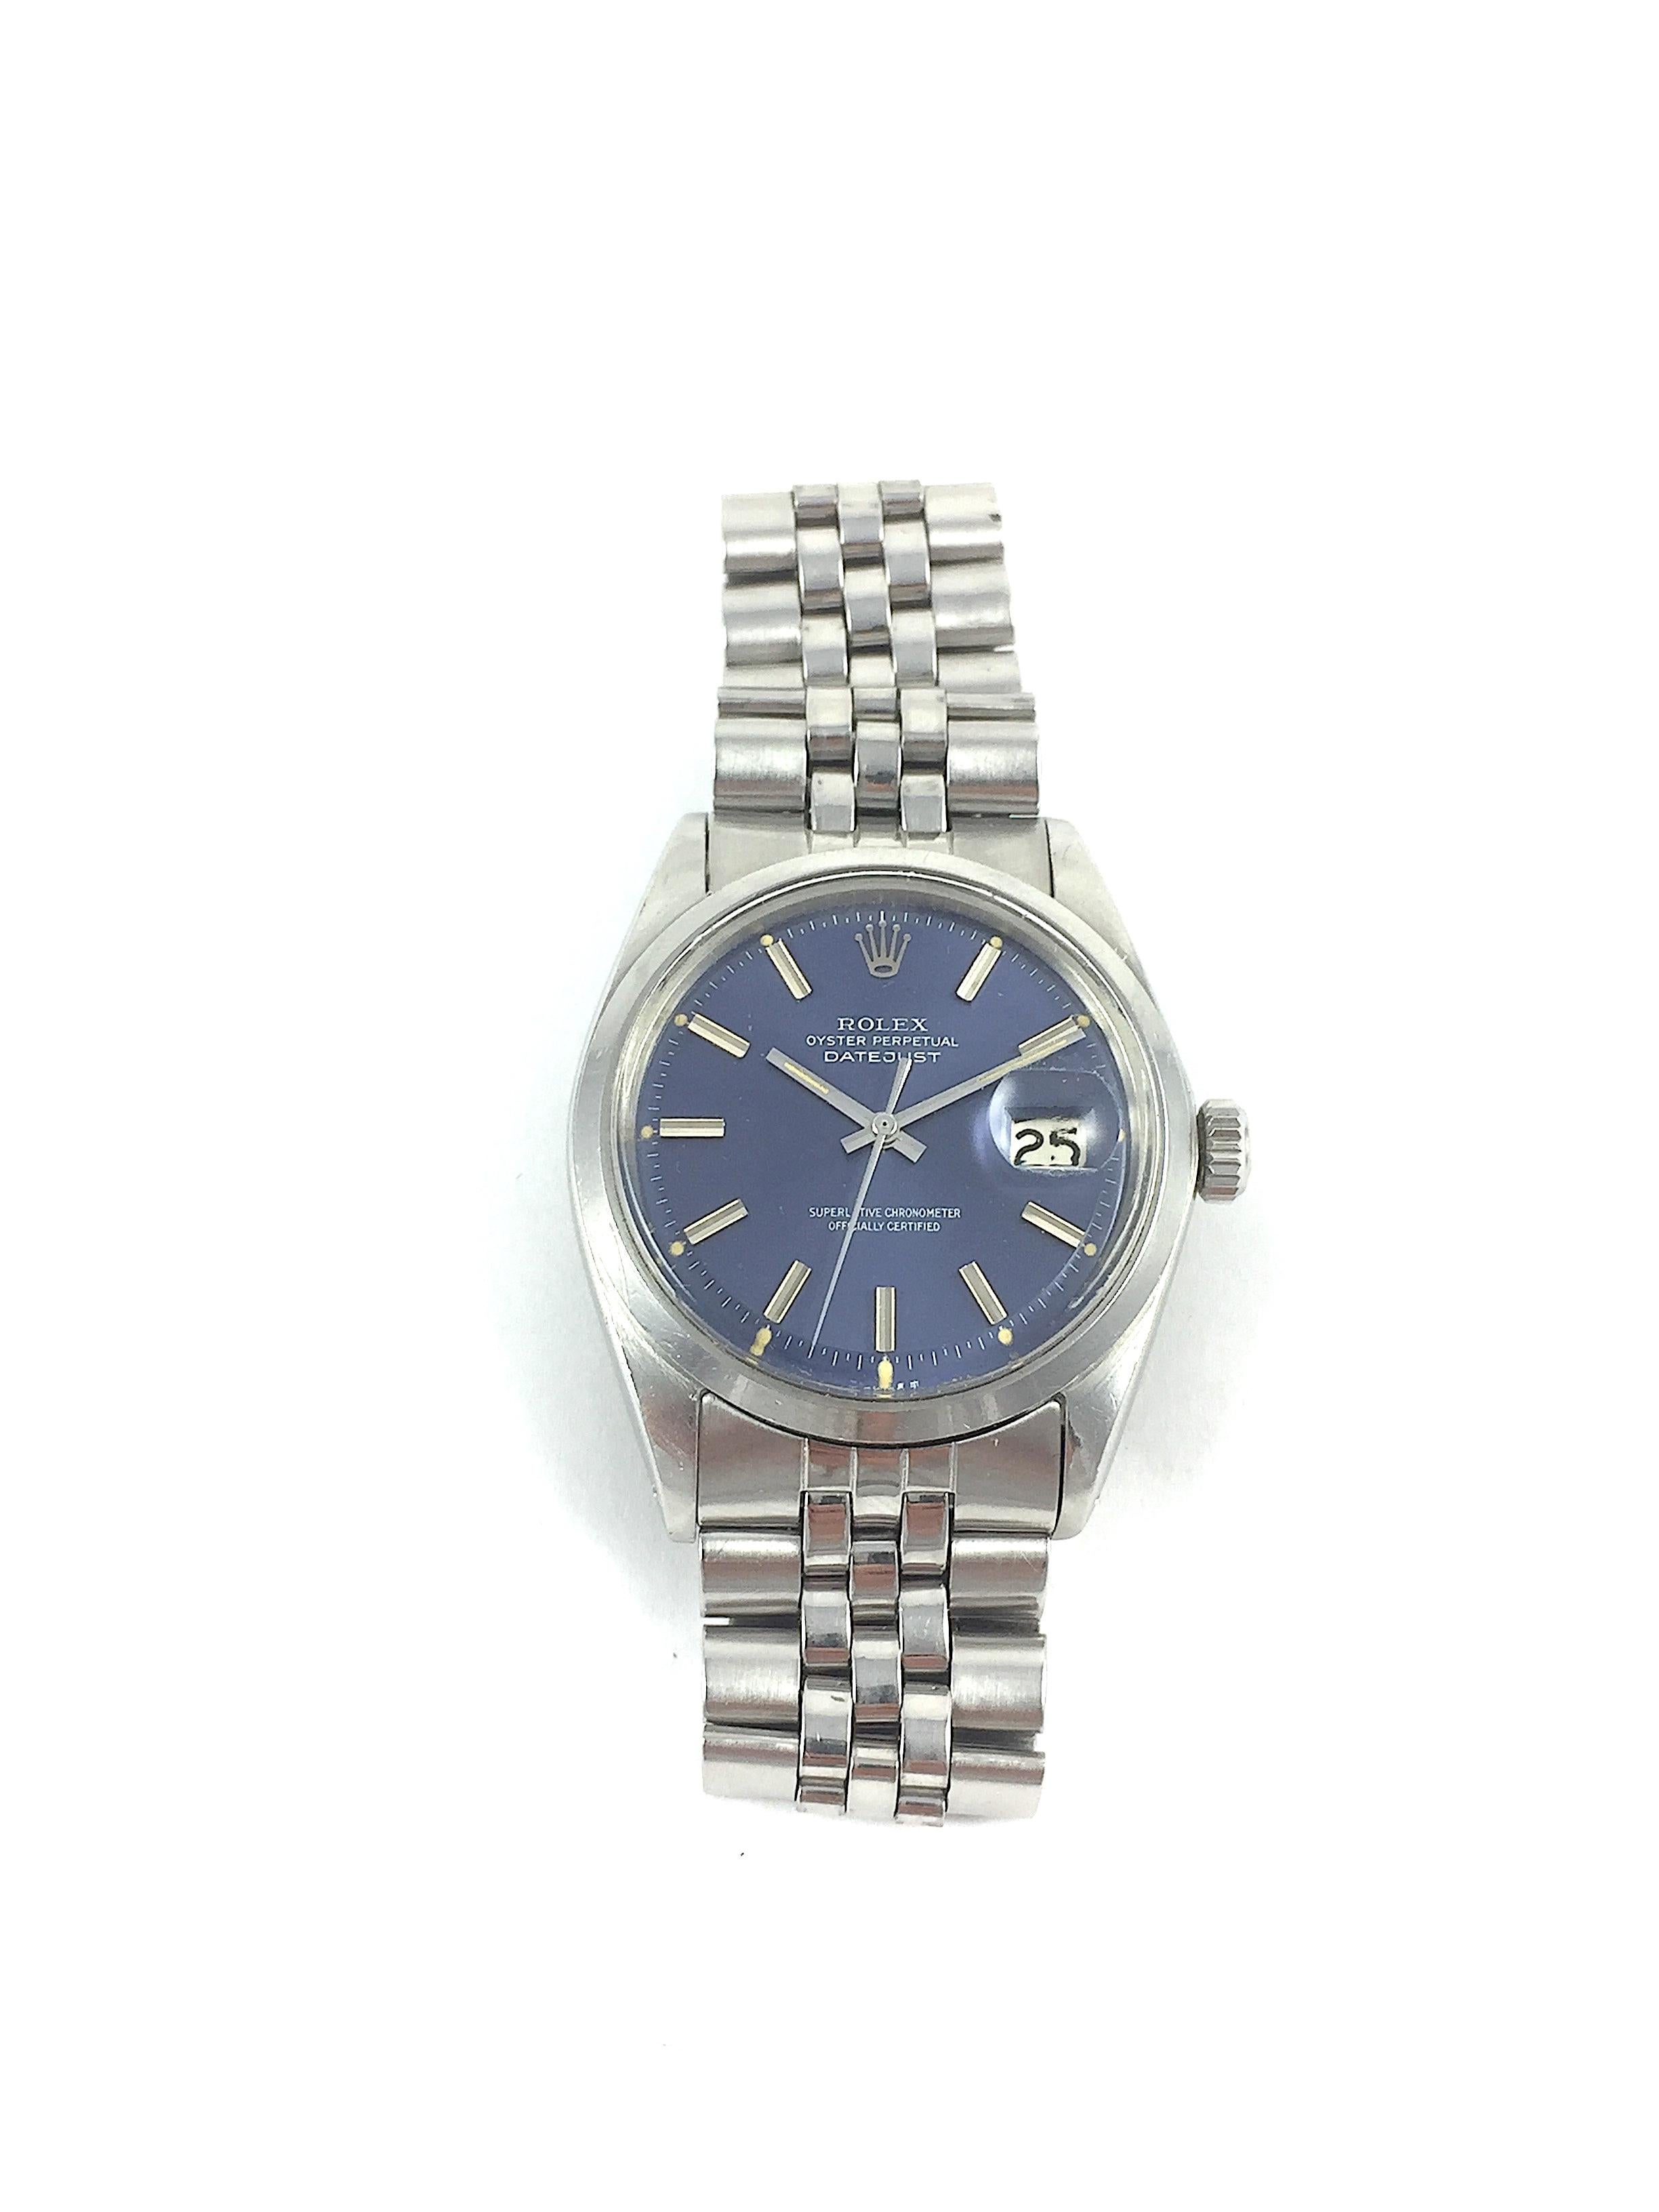 Rolex Stainless Steel Oyster Perpetual Datejust Watch
Rare Factory Blue Wide Index Gloss Dial
Smooth Stainless Steel Bezel
Stainless Steel Case
Dial Shows Some Wear and light Markings 
36mm in size 
Features Rolex Automatic Movement with Calibre